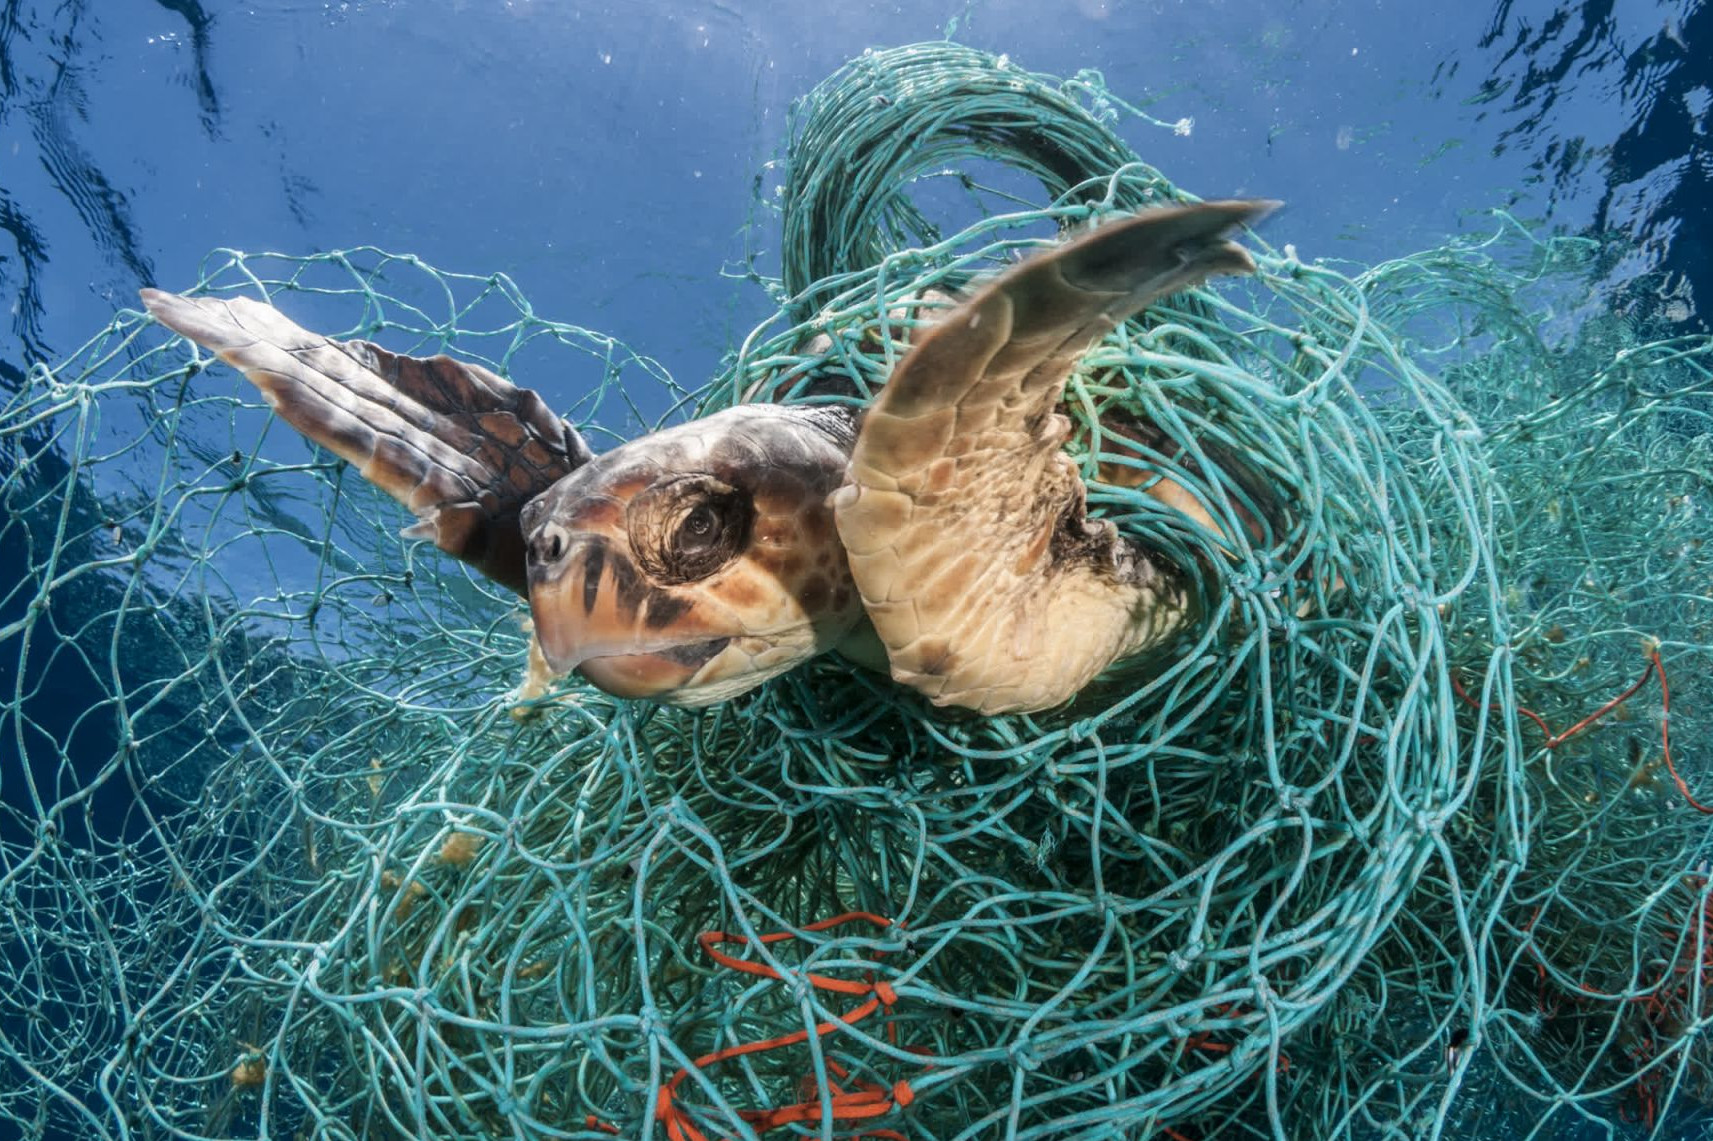 The deadliest catch: world’s biggest seafood companies can do more to address lost fishing gear - Sea Change - World Animal Protection